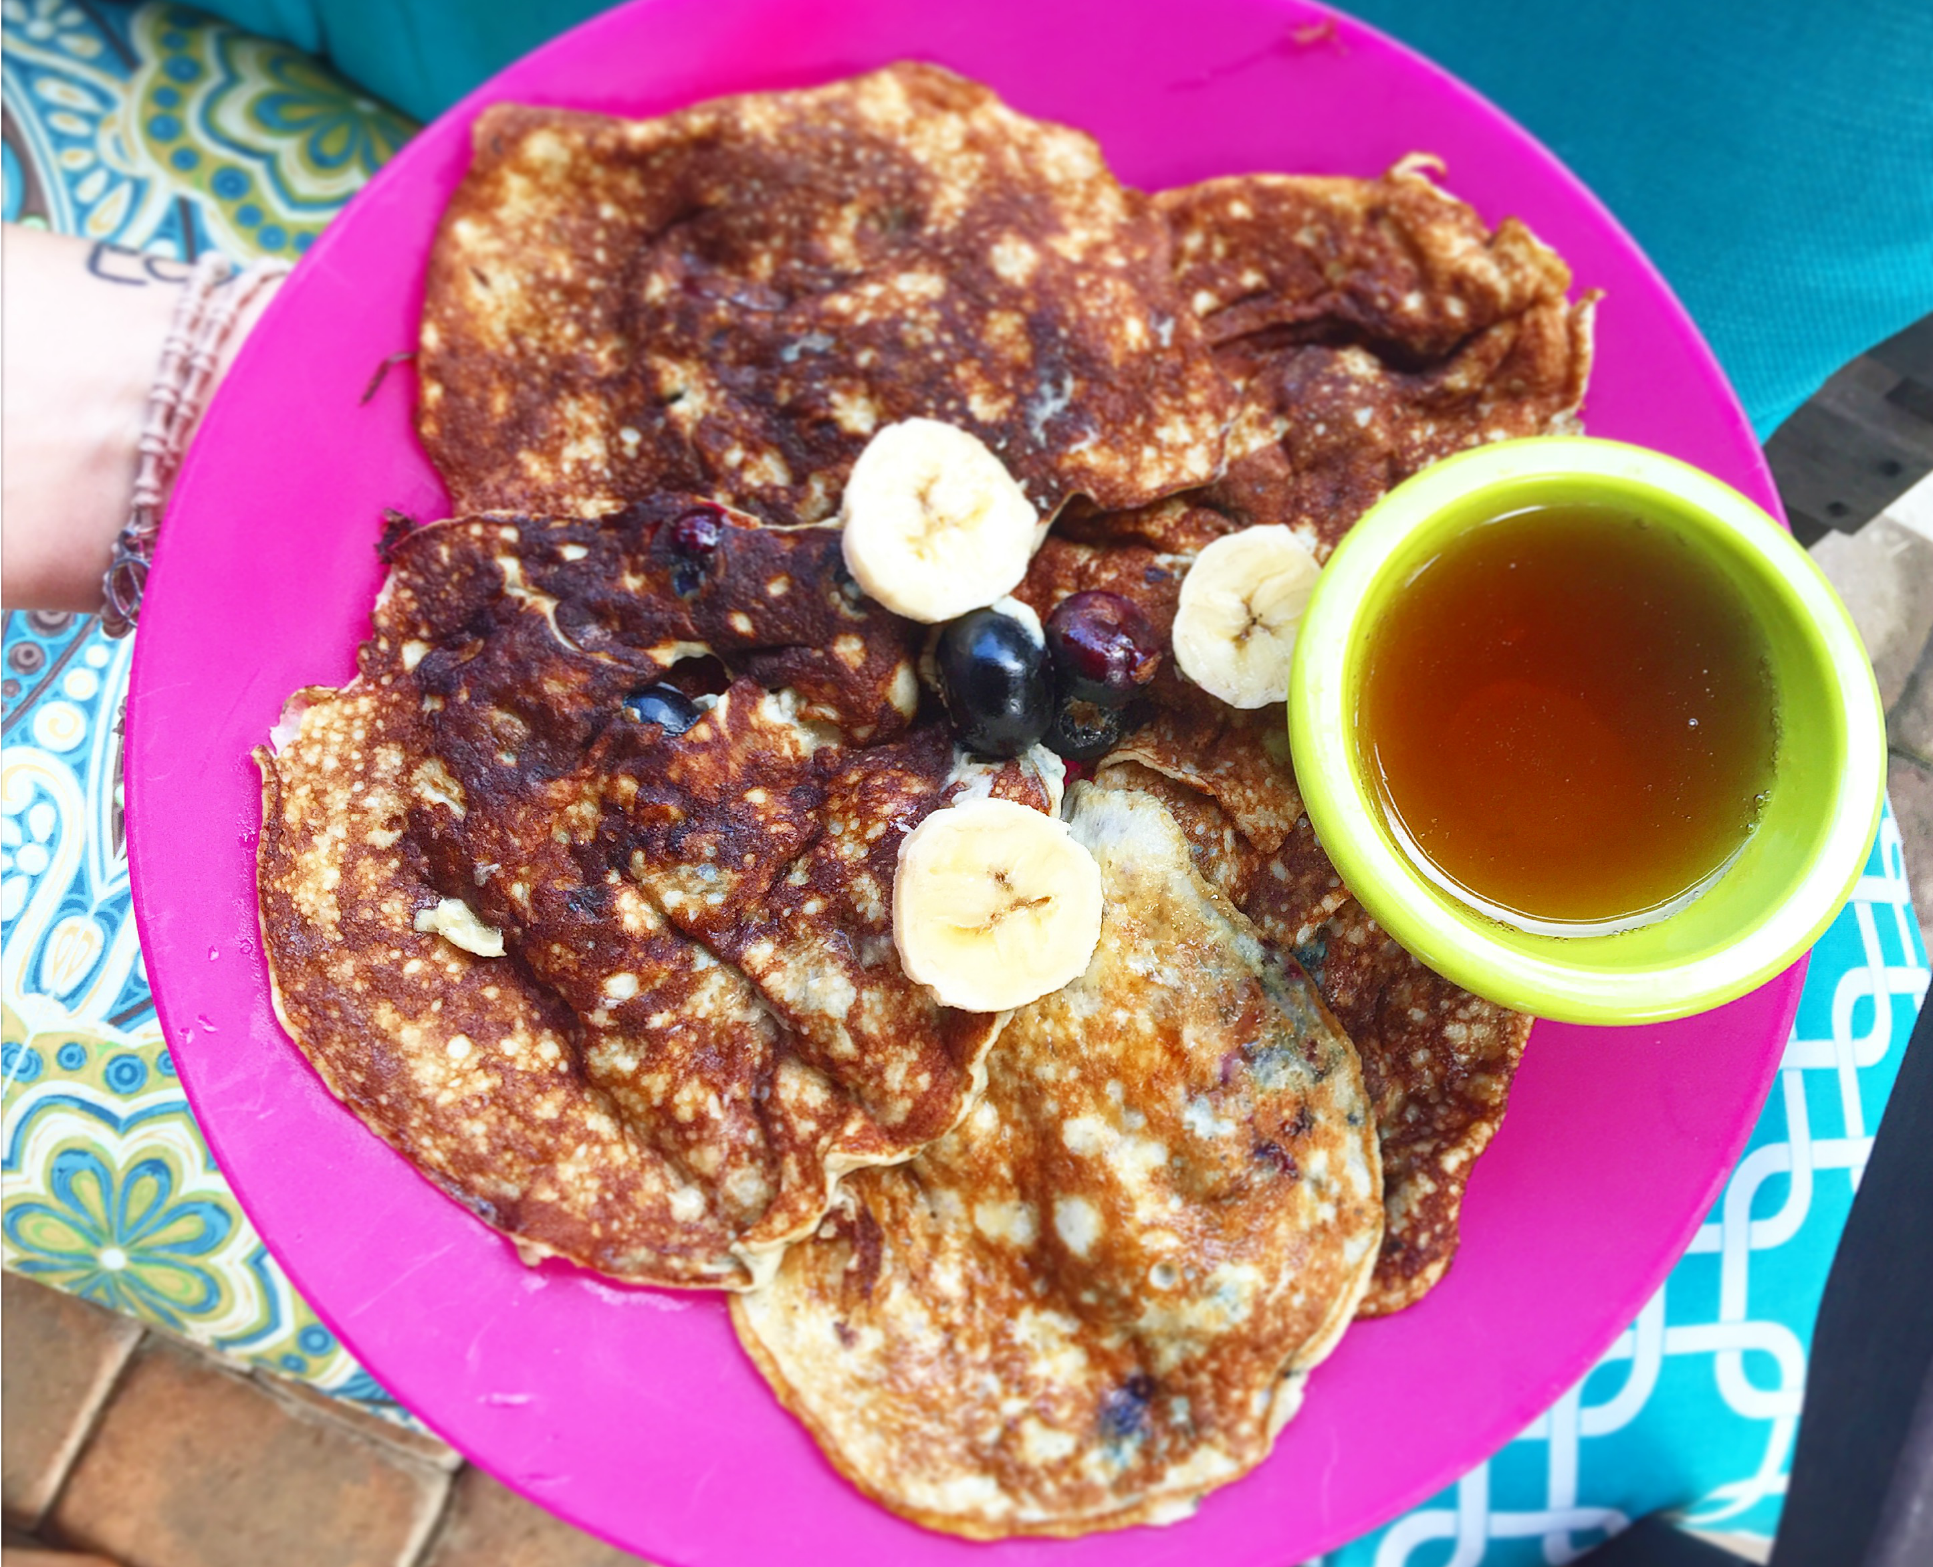  banana-egg pancakes with protein powder and blueberries